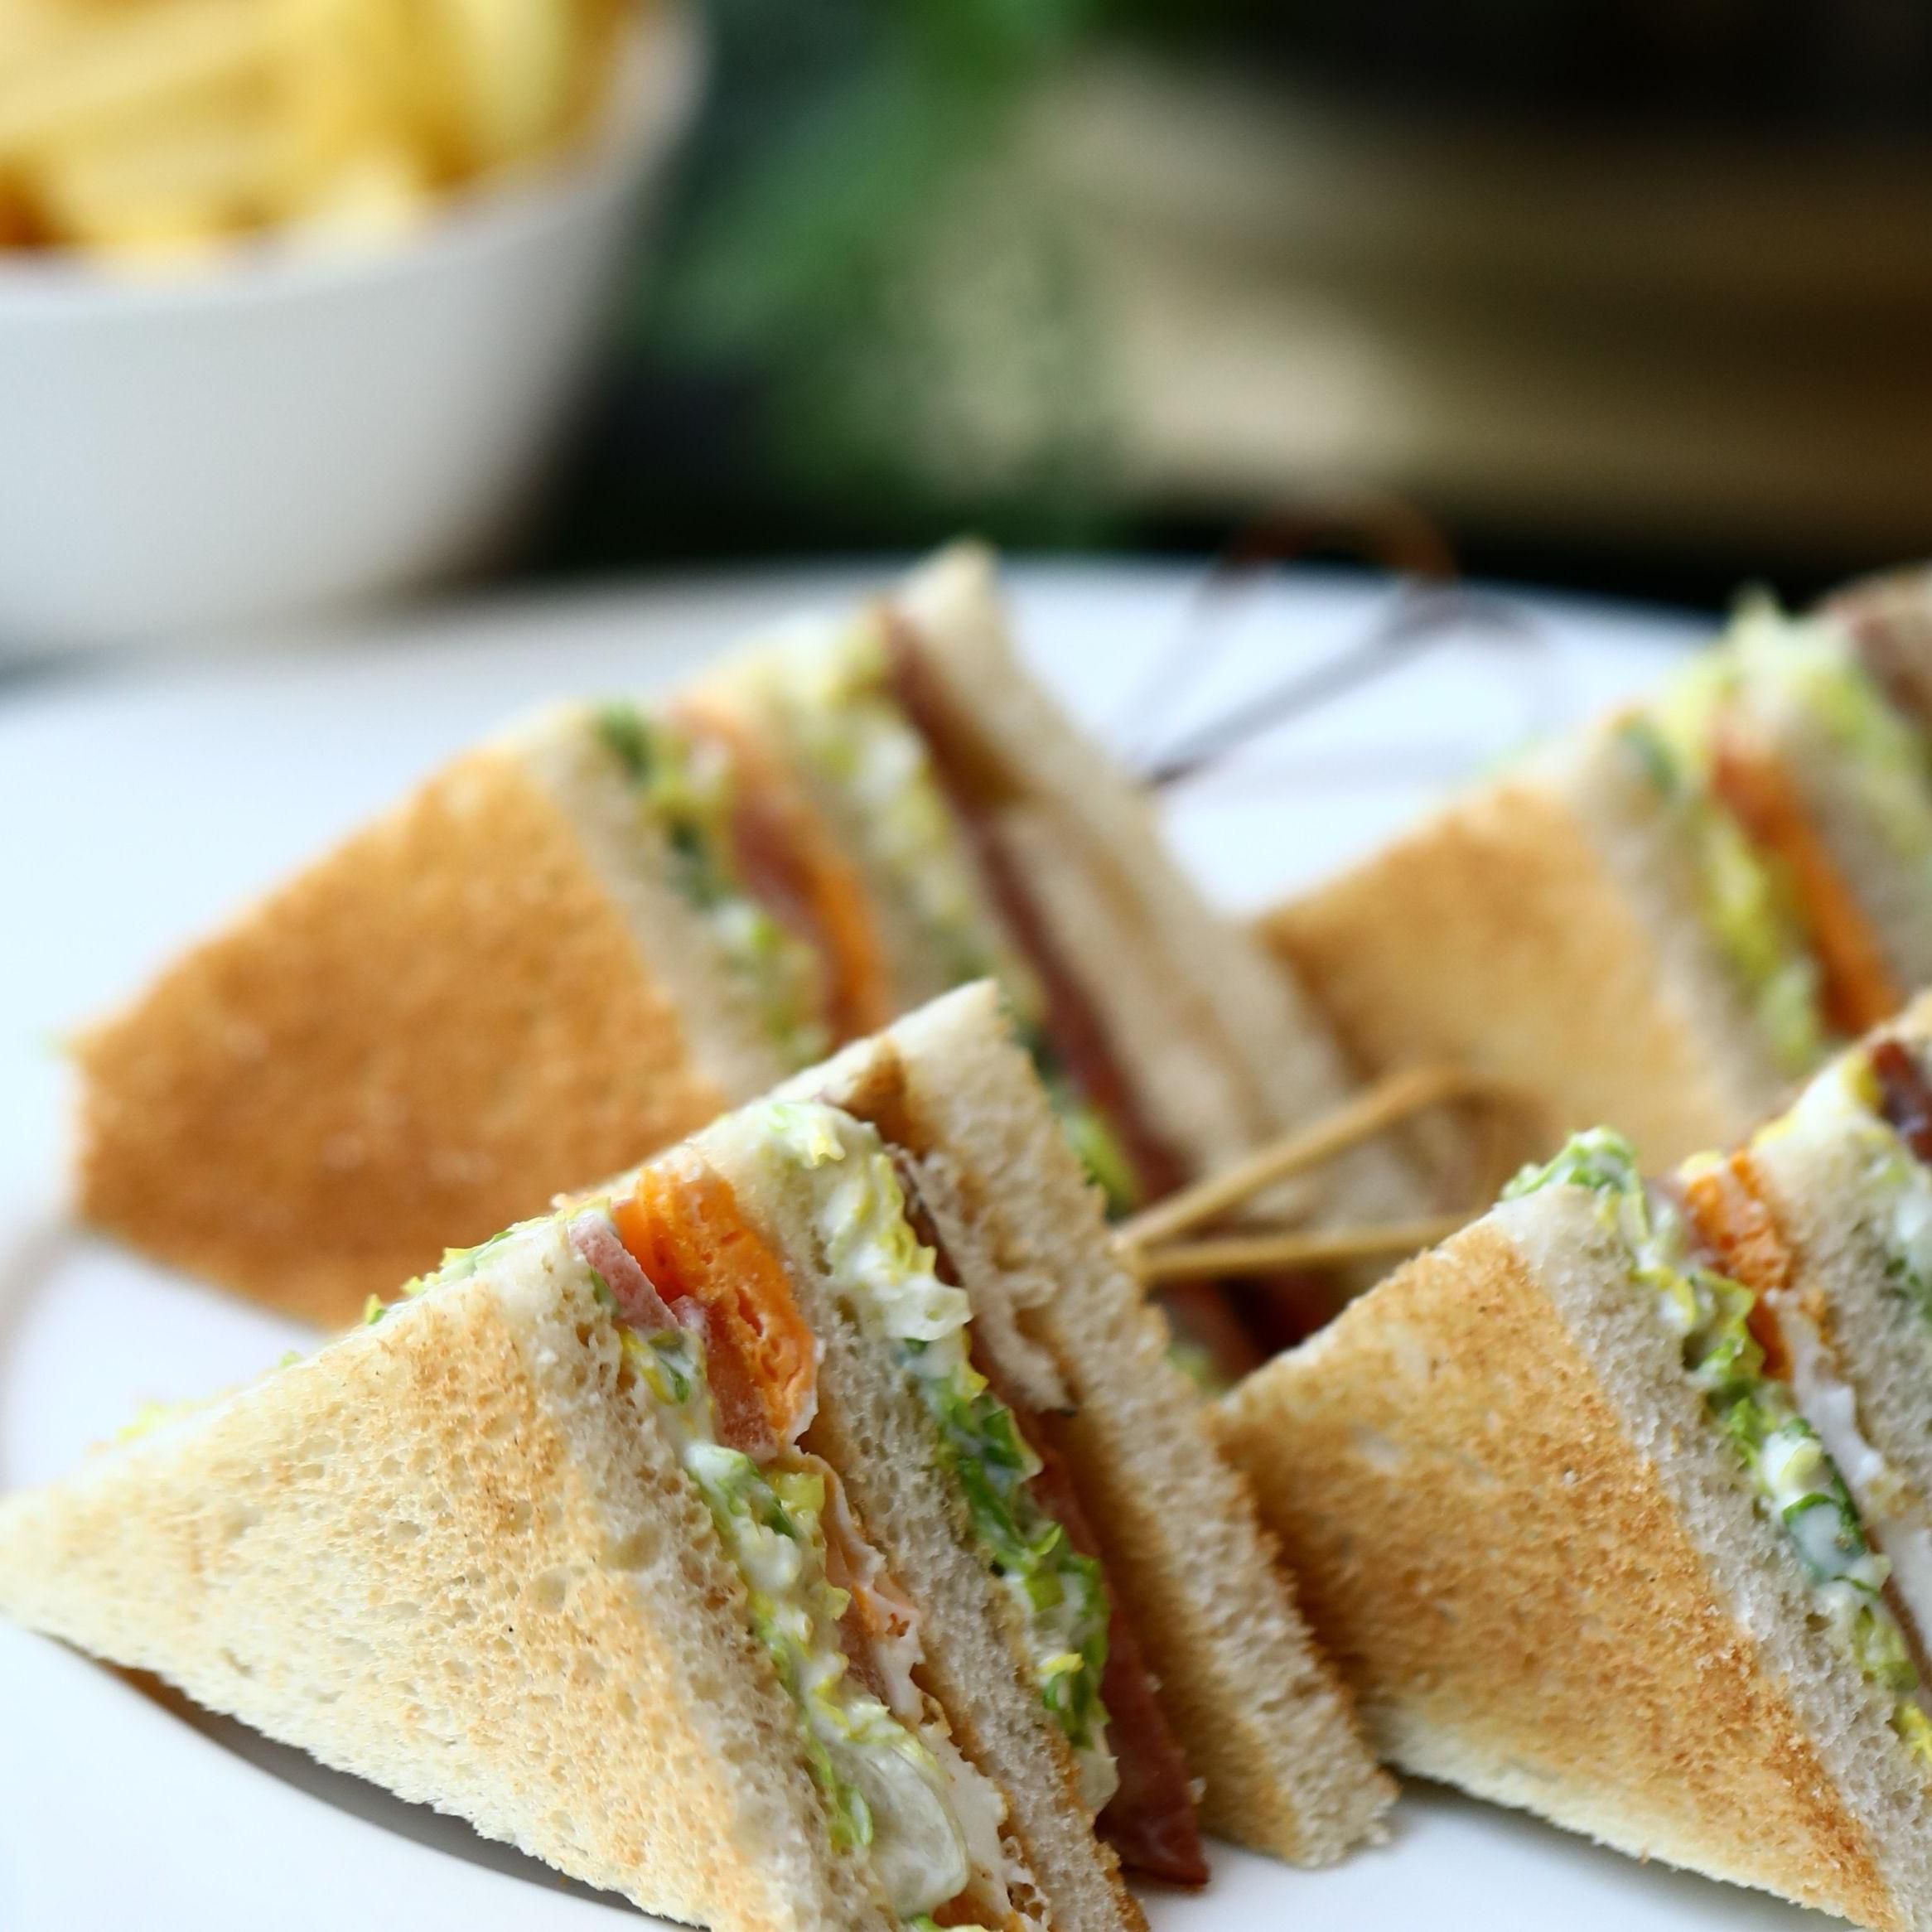 Freshly made club sandwich at Connexions